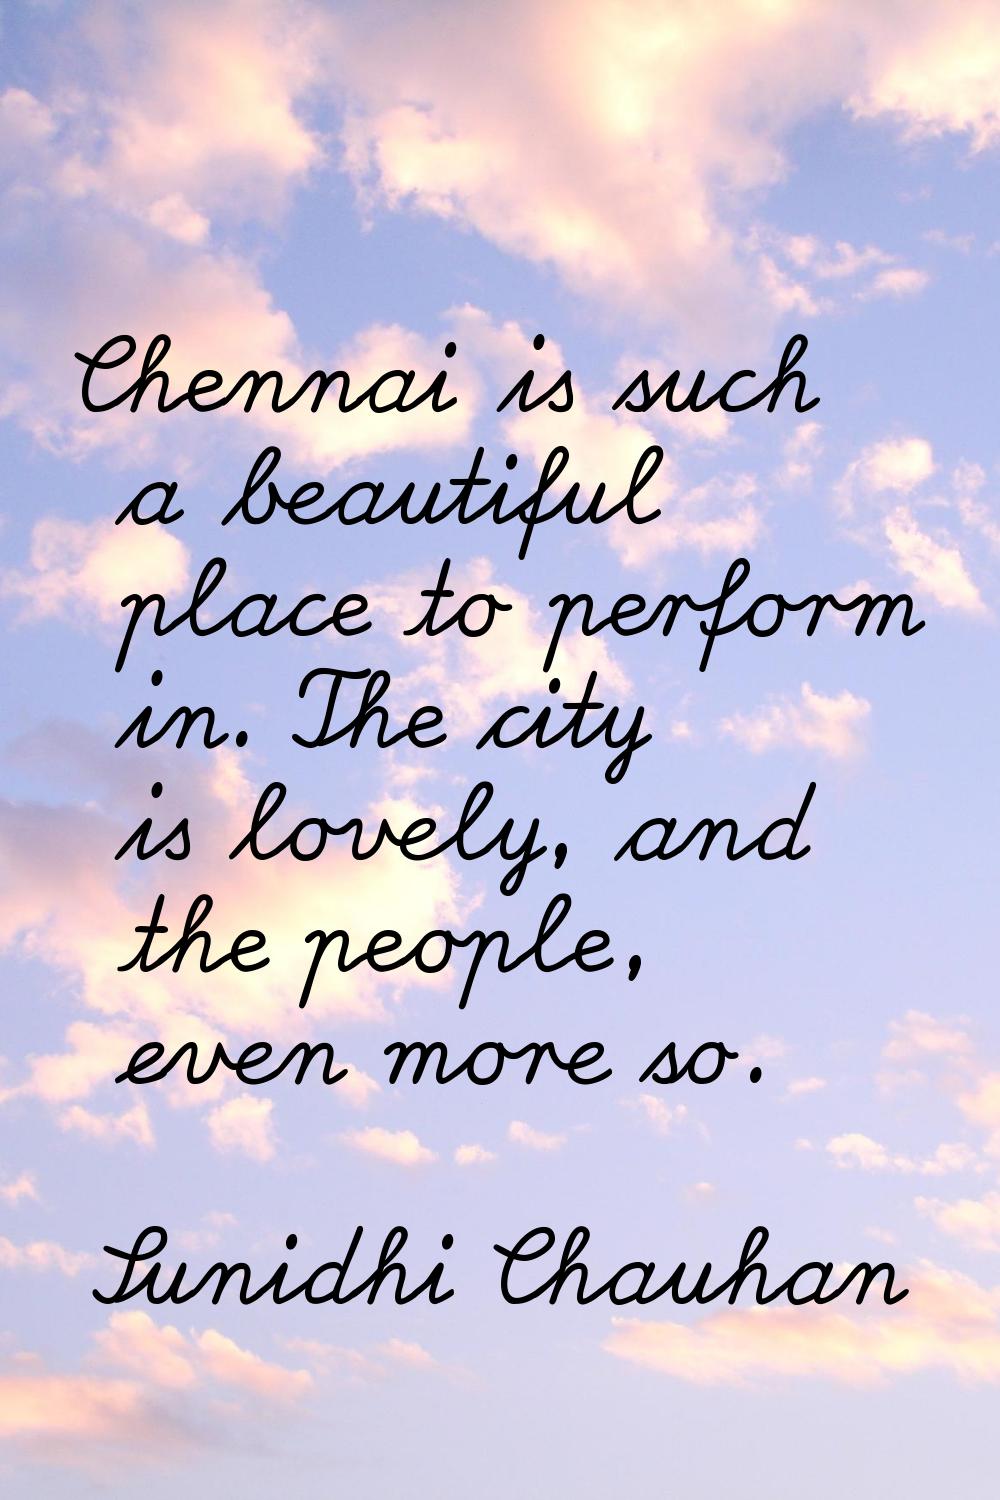 Chennai is such a beautiful place to perform in. The city is lovely, and the people, even more so.